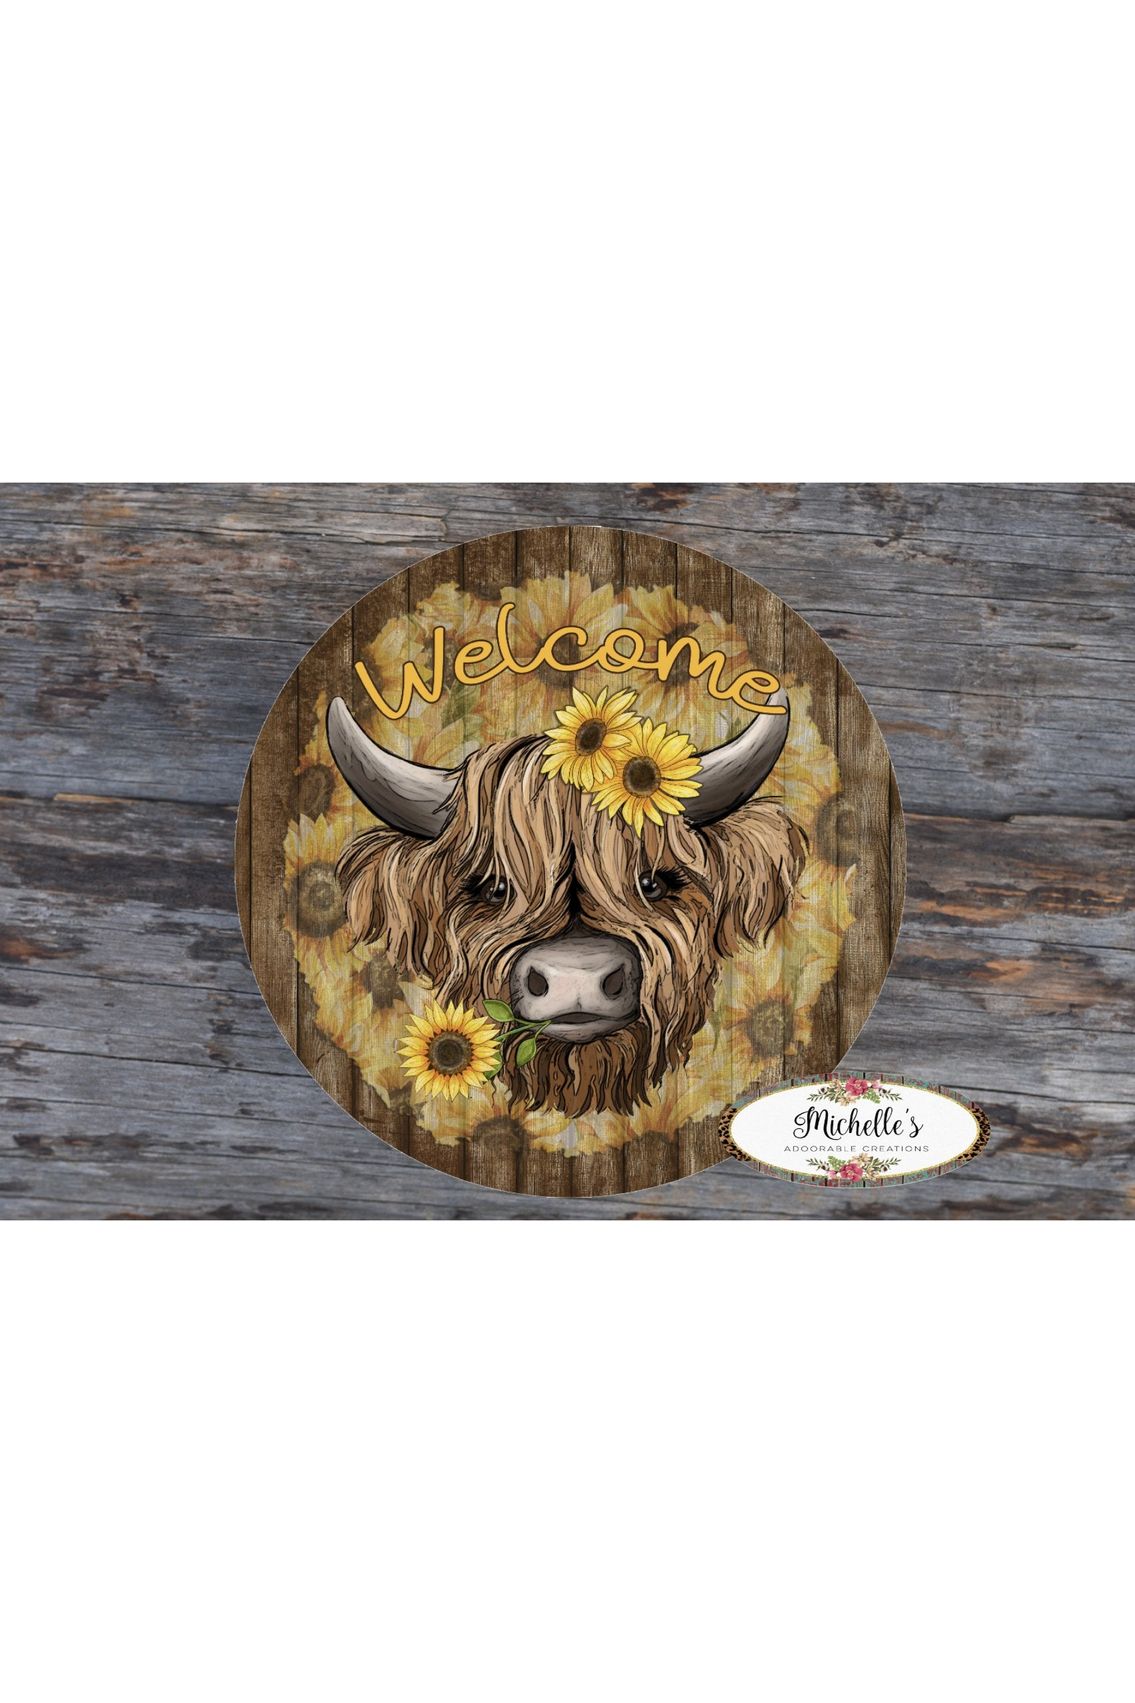 Shop For Highland Cow Welcome Sunflower Round Sign - Wreath Enhancement